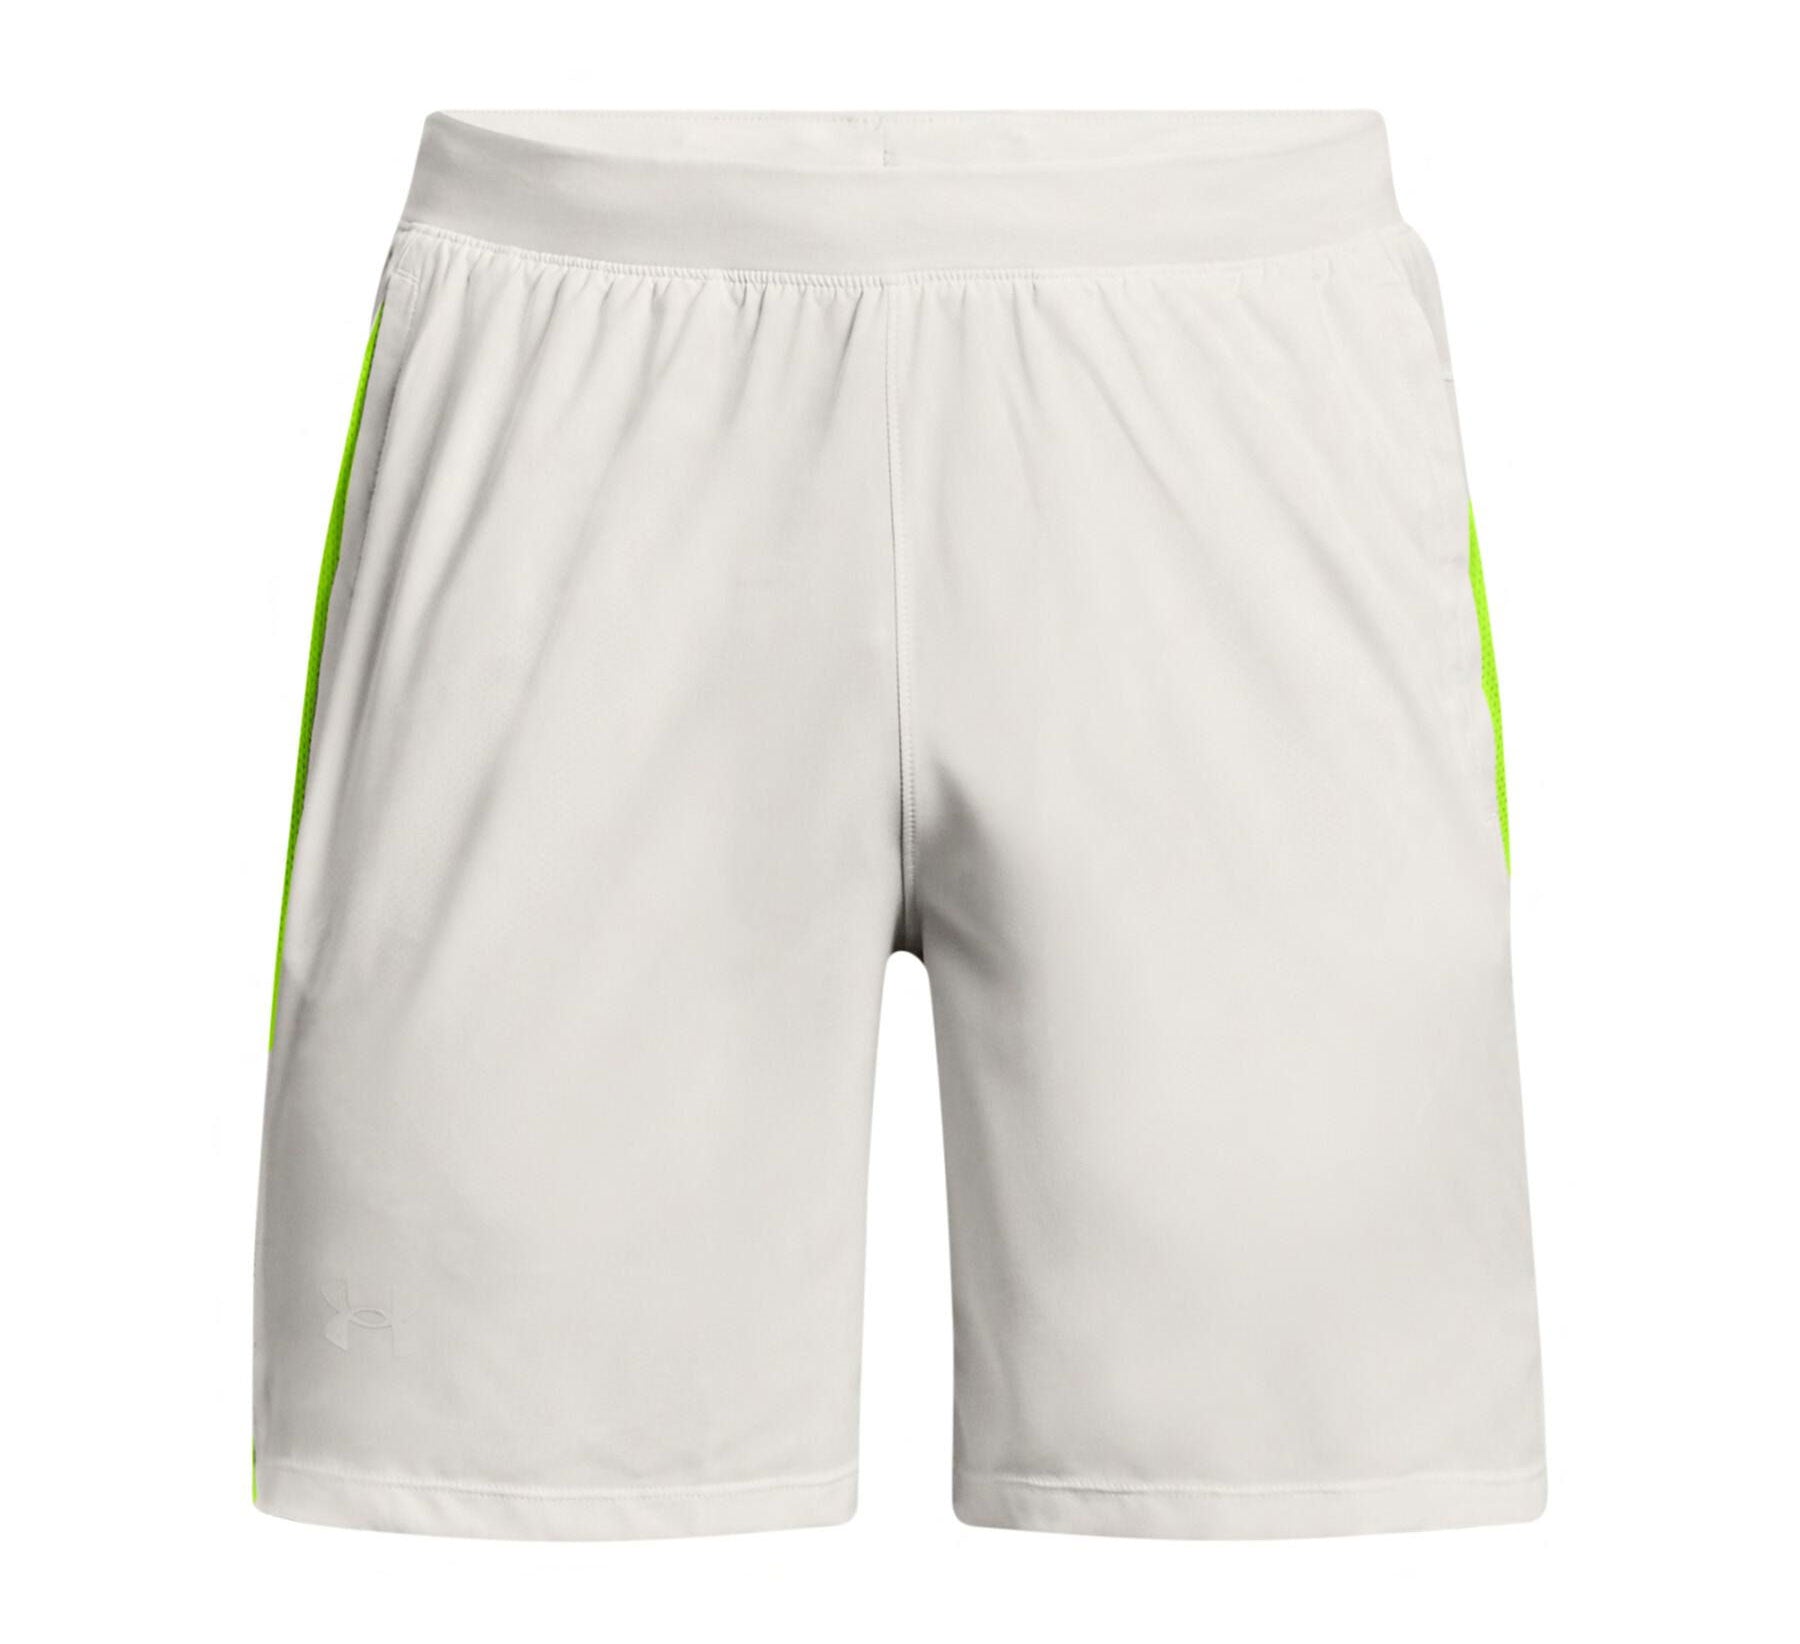 Under Armour Launch Run 7 inch Shorts - Mens - Grey Mist/Lime Surge